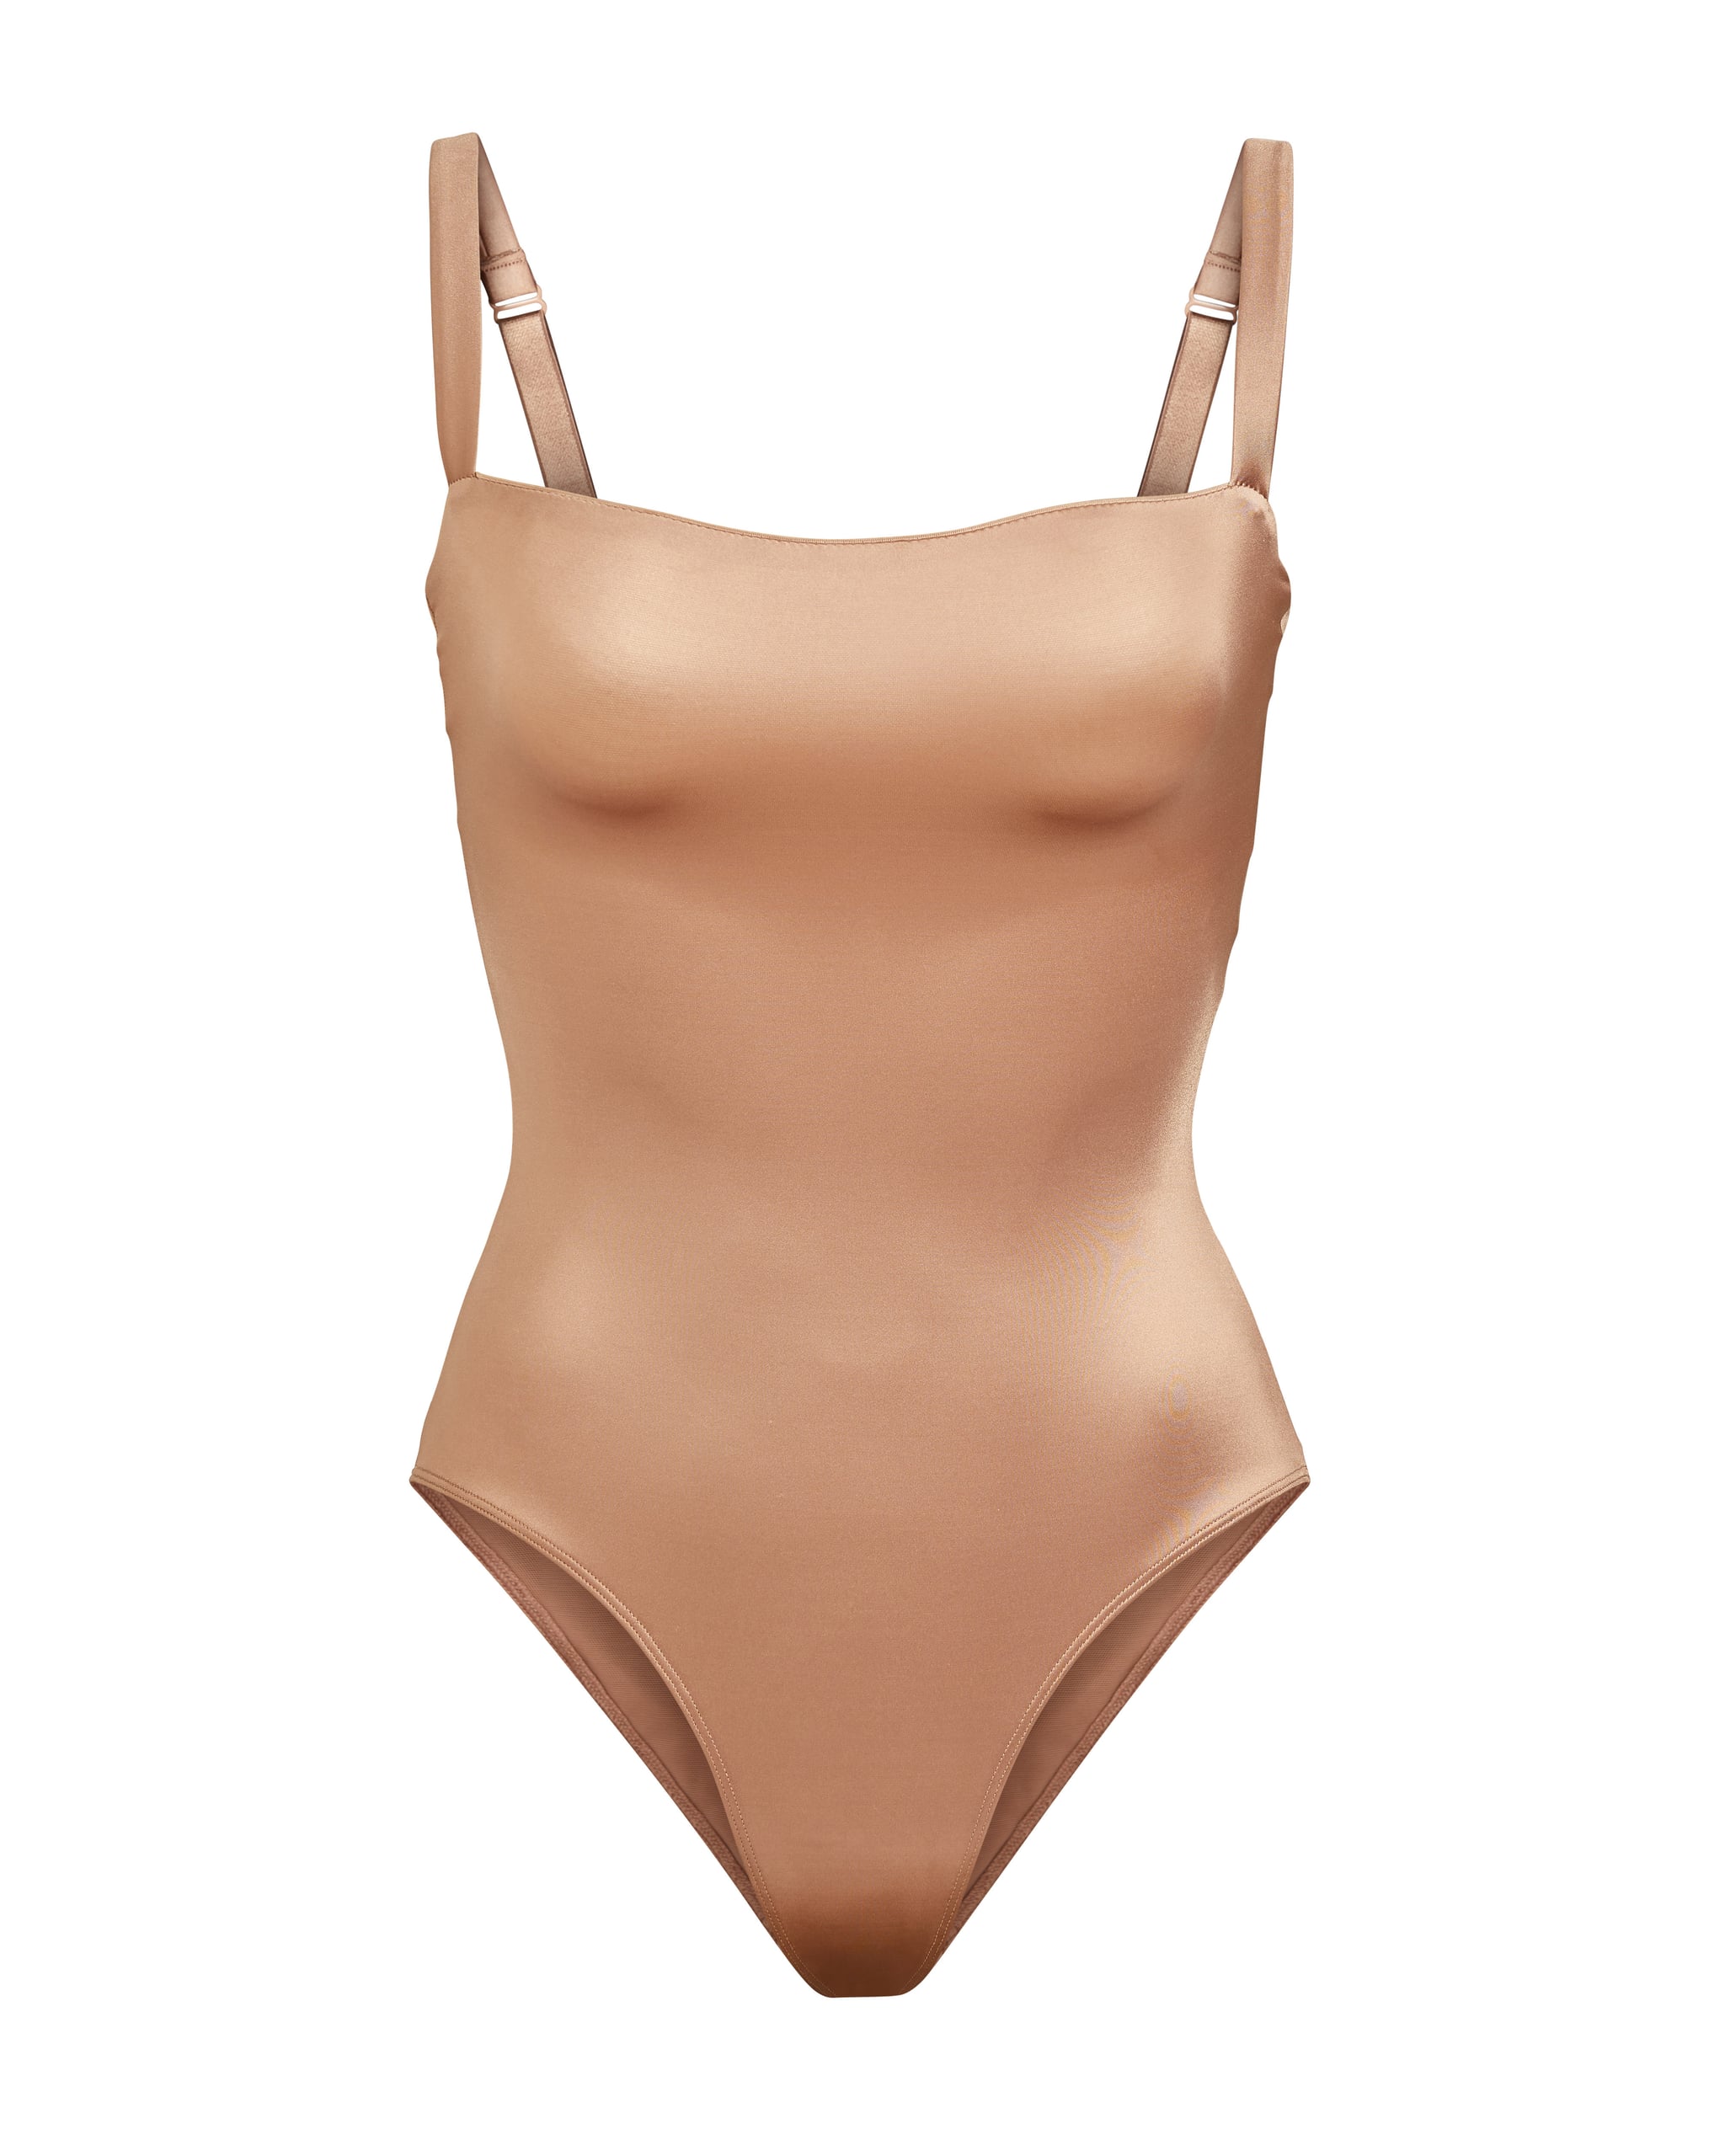 SKIMS Stretch Satin Smoothing Bodysuit in Desert Clay, SKIMS Is Launching  a Sexy Stretch Satin Lingerie Line Just in Time For Valentine's Day